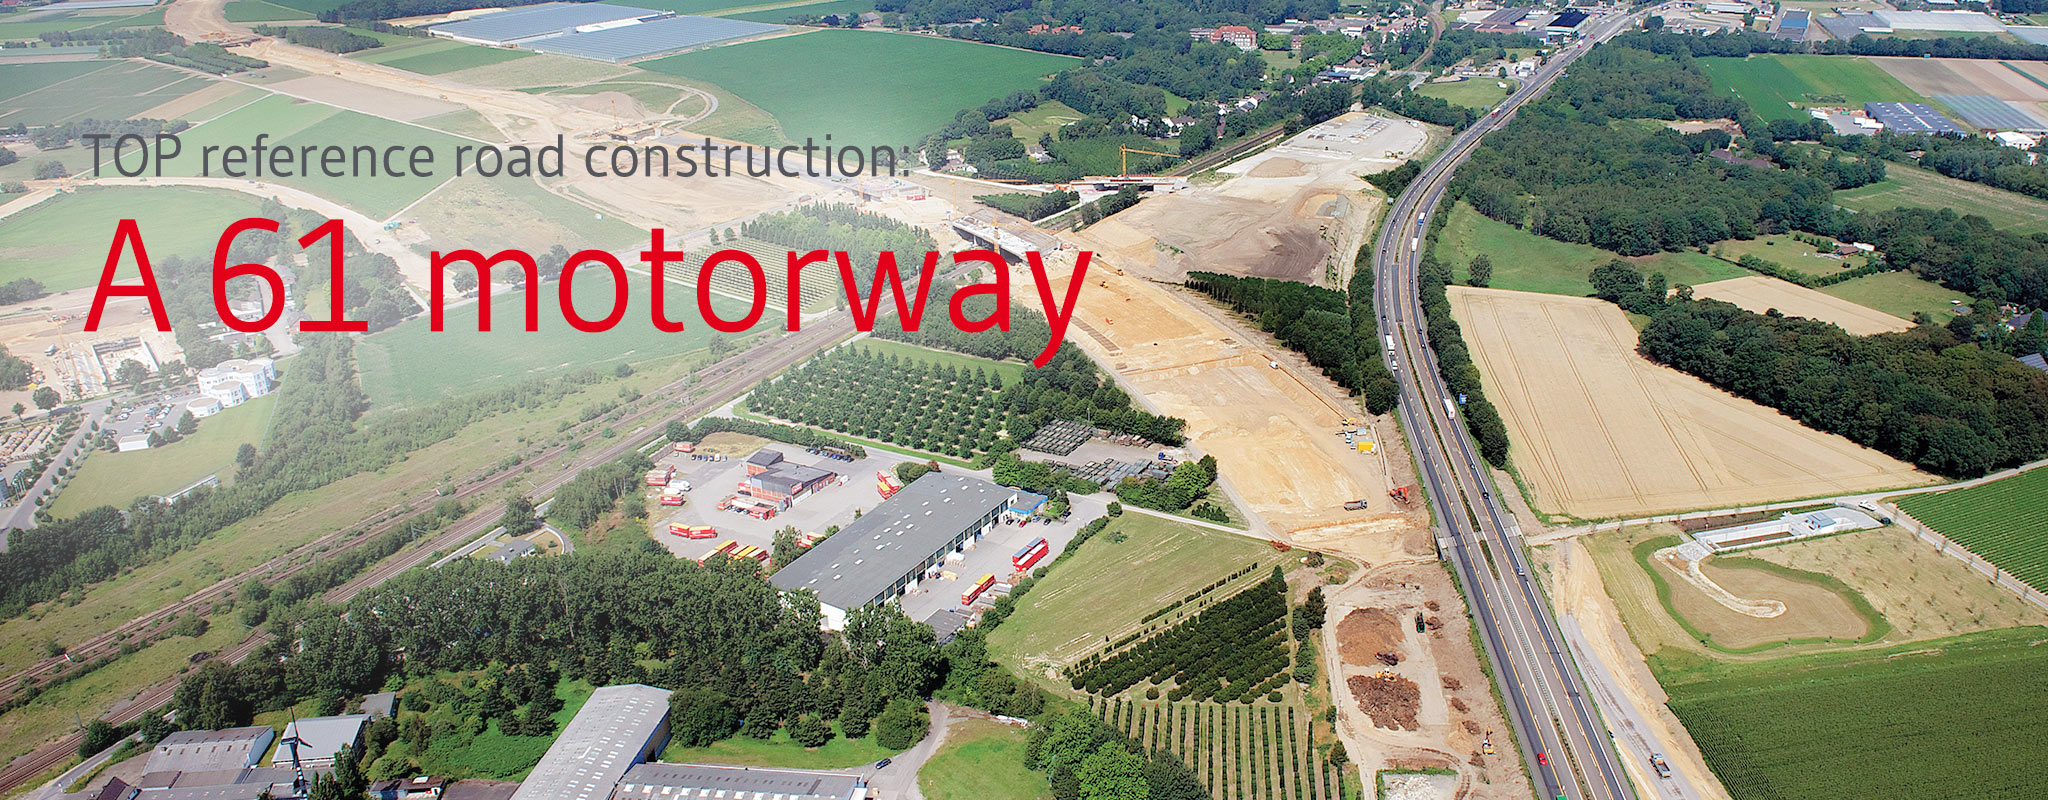 A 61 motorway: Execution with IBA as substitute construction material in the road substructure